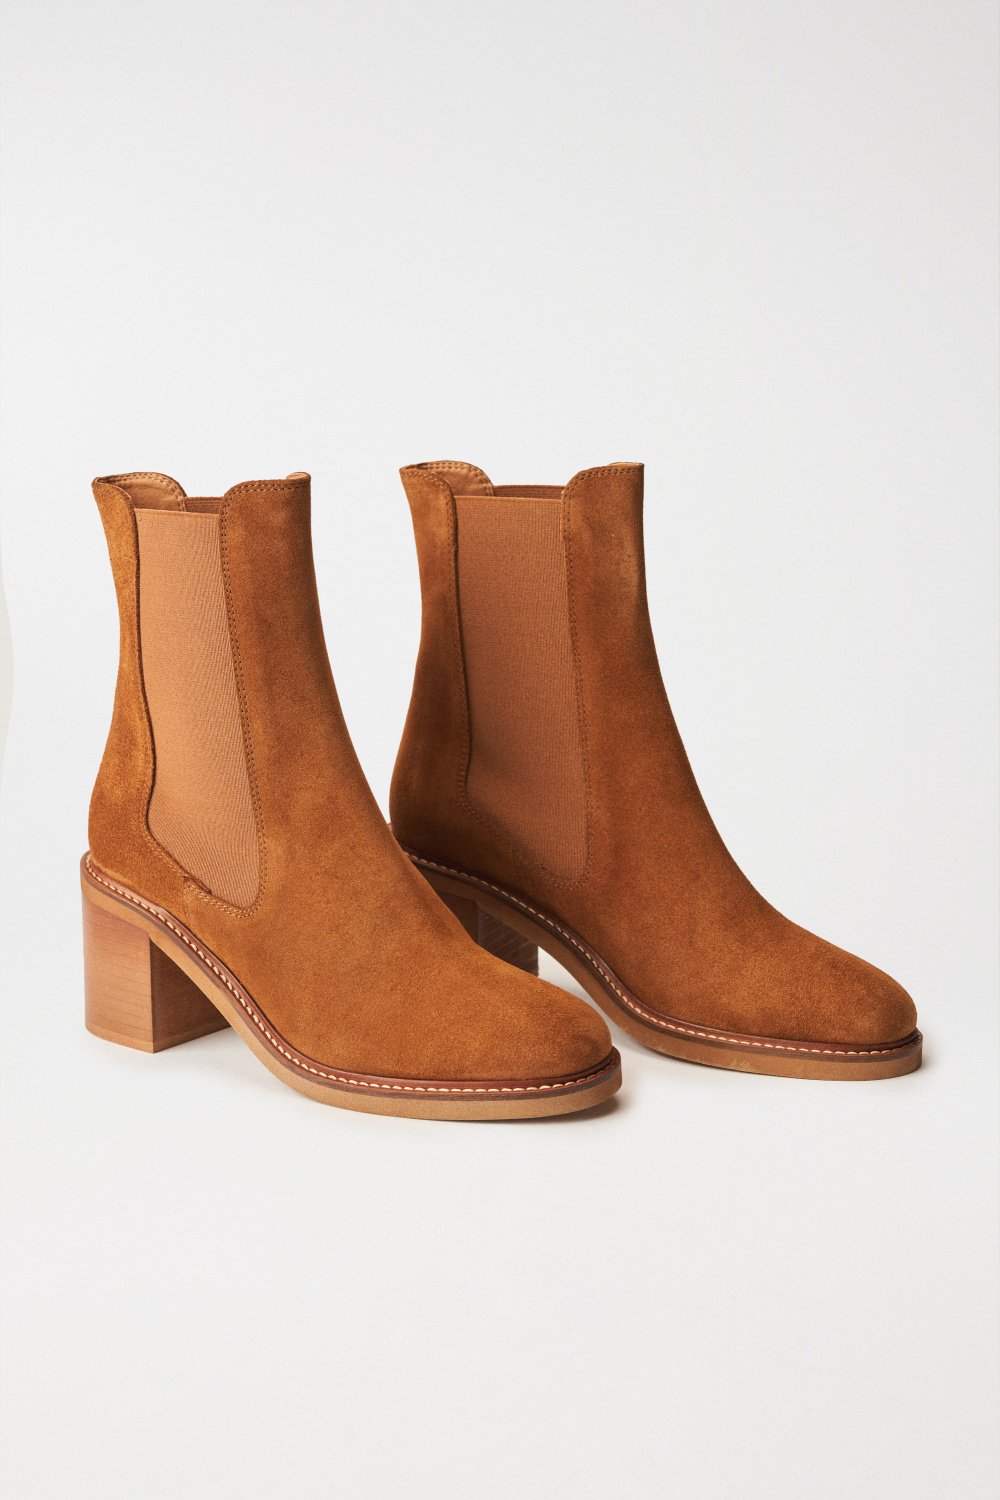 SUEDE ANKLE BOOT WITH ELASTIC SIDES - Salsa